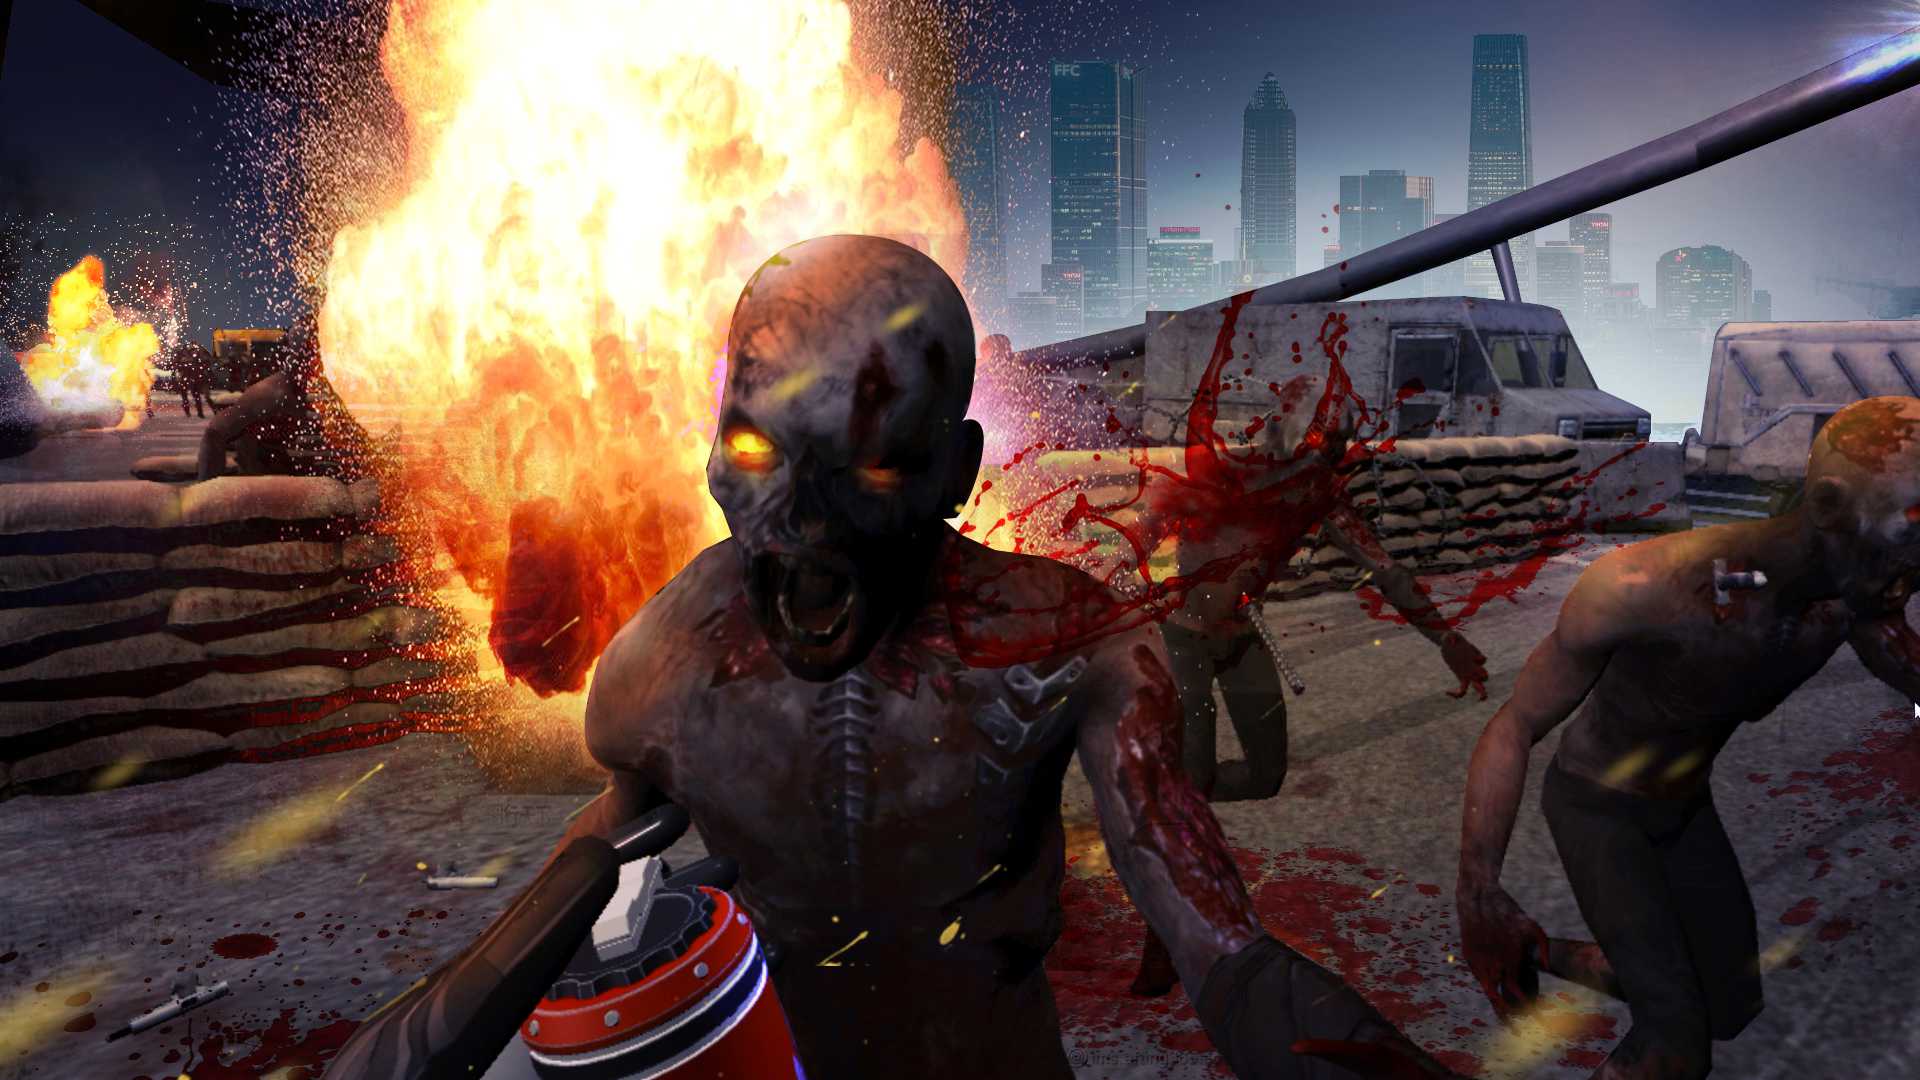 The Survival Test VR: Defend To Death